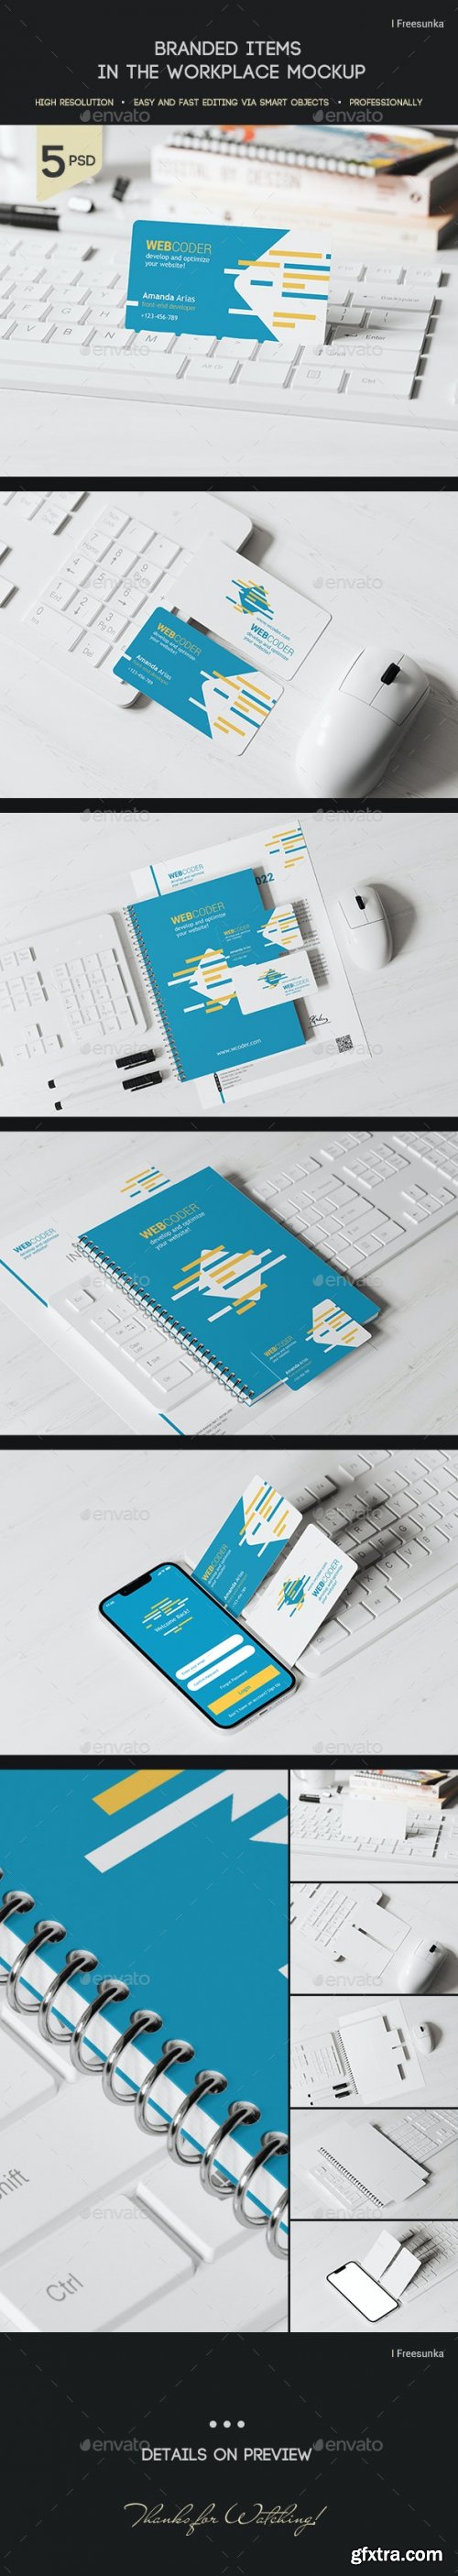 GraphicRiver - Branded Items In The Workplace Mockup 37819301